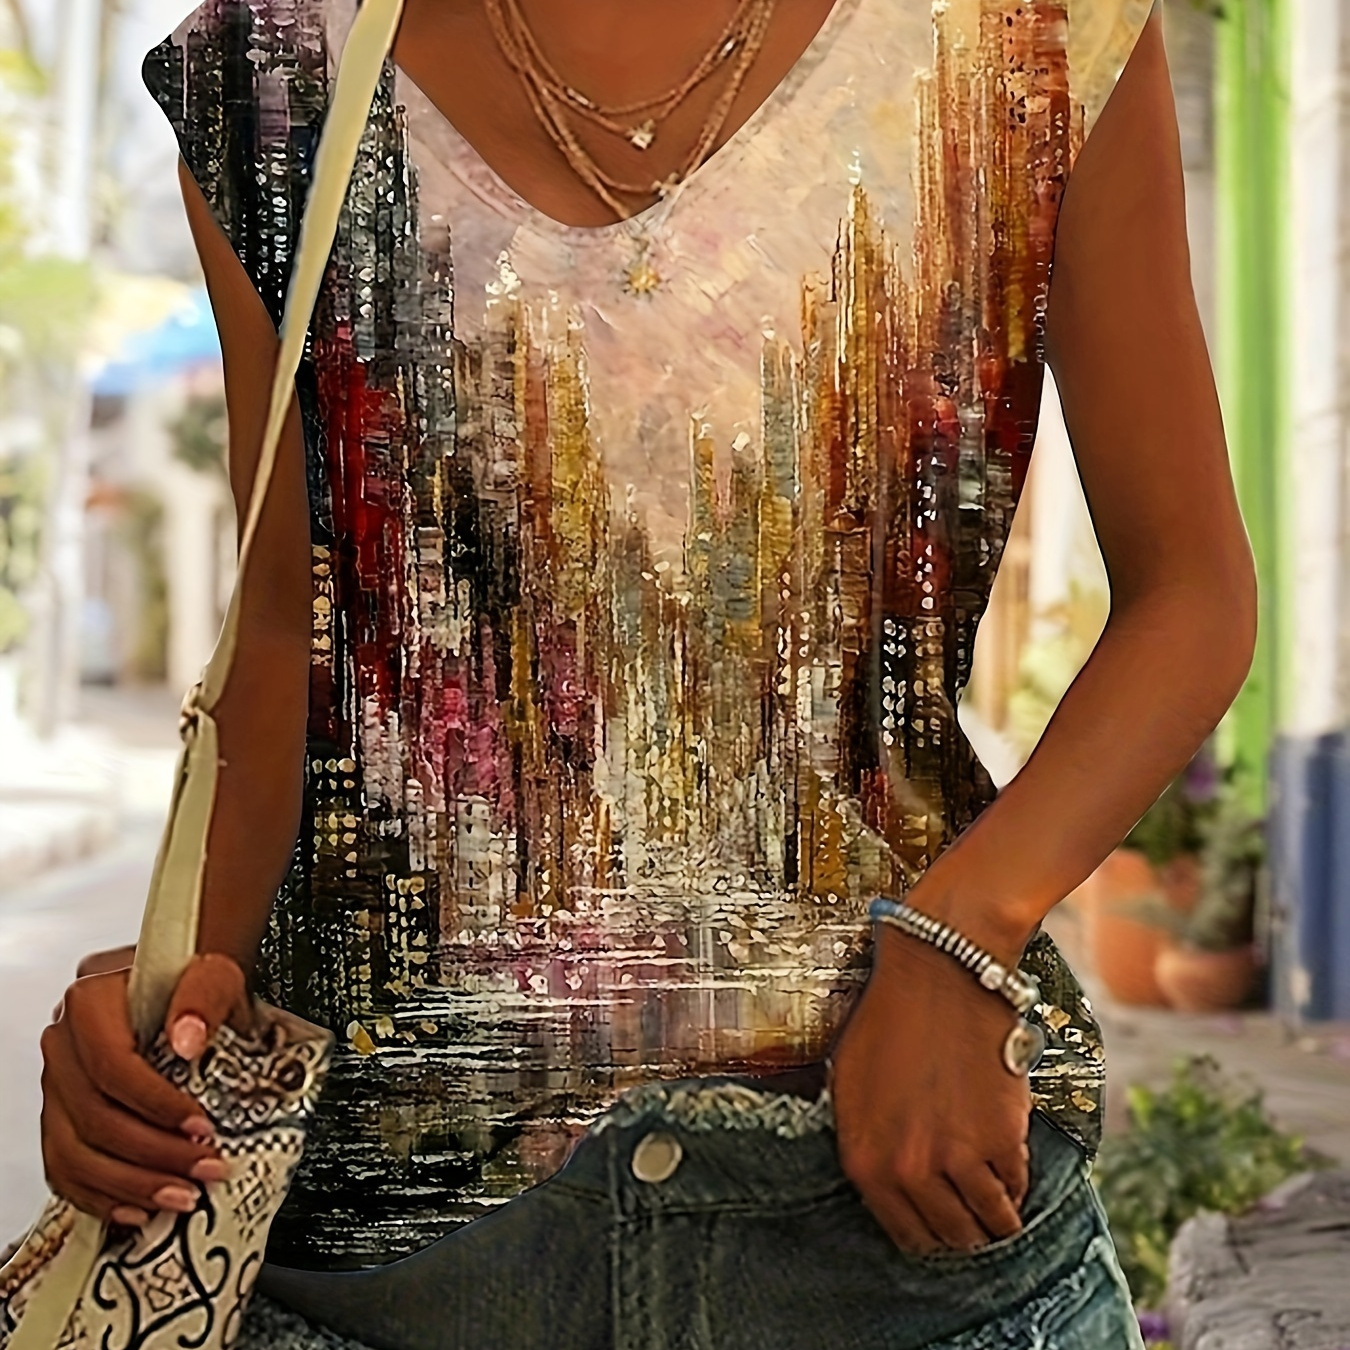 

City Print V Neck Tank Top, Casual Sleeveless Tank Top For Summer, Women's Clothing